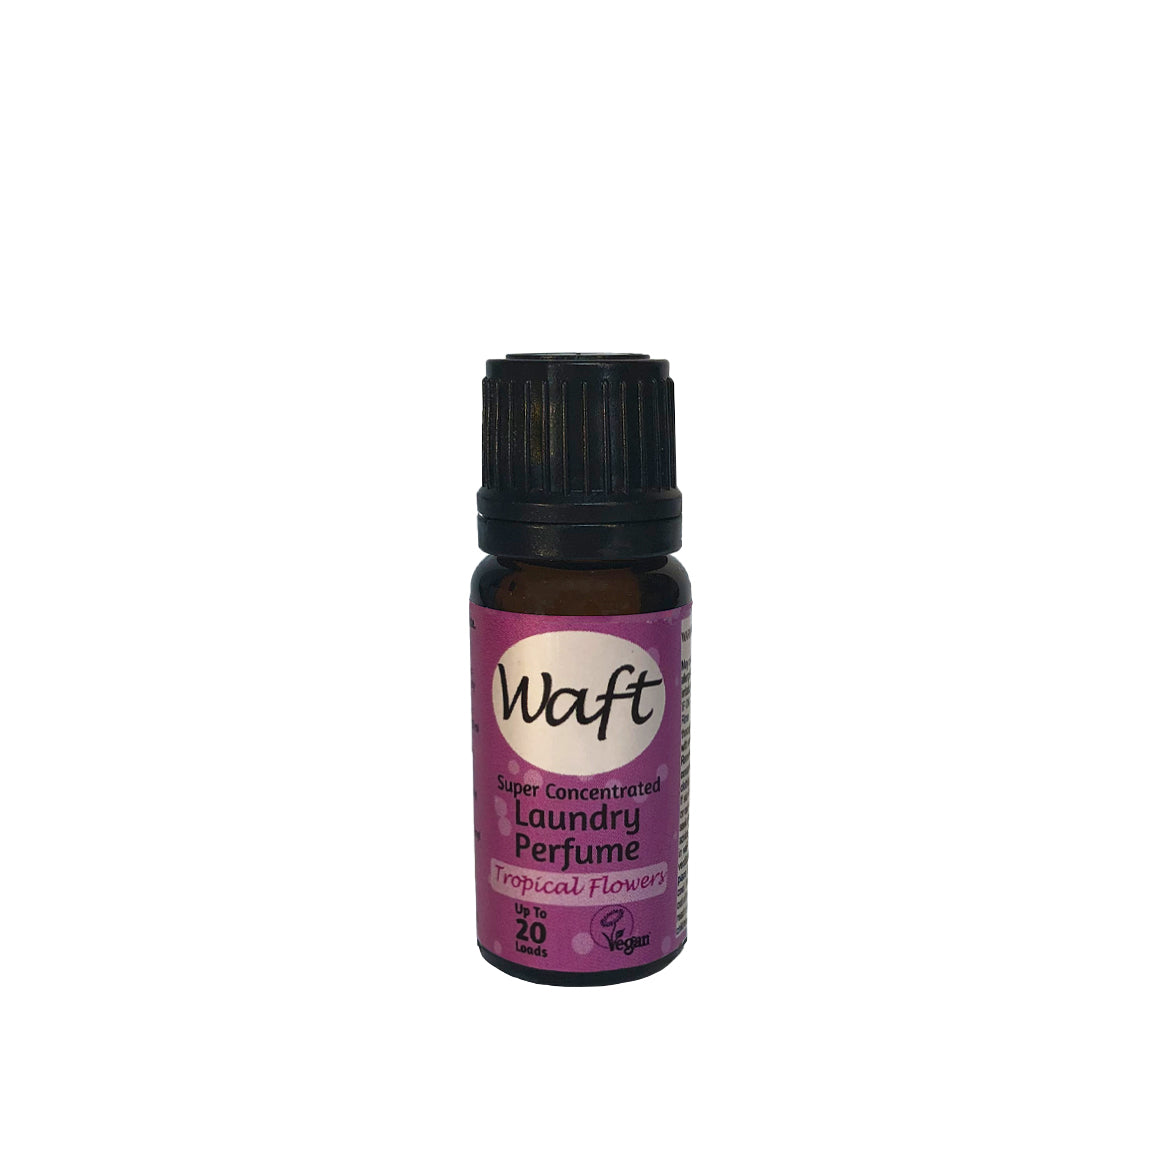 Concentrated Laundry Perfume in Tropical Flowers 10ml (20 Wash)